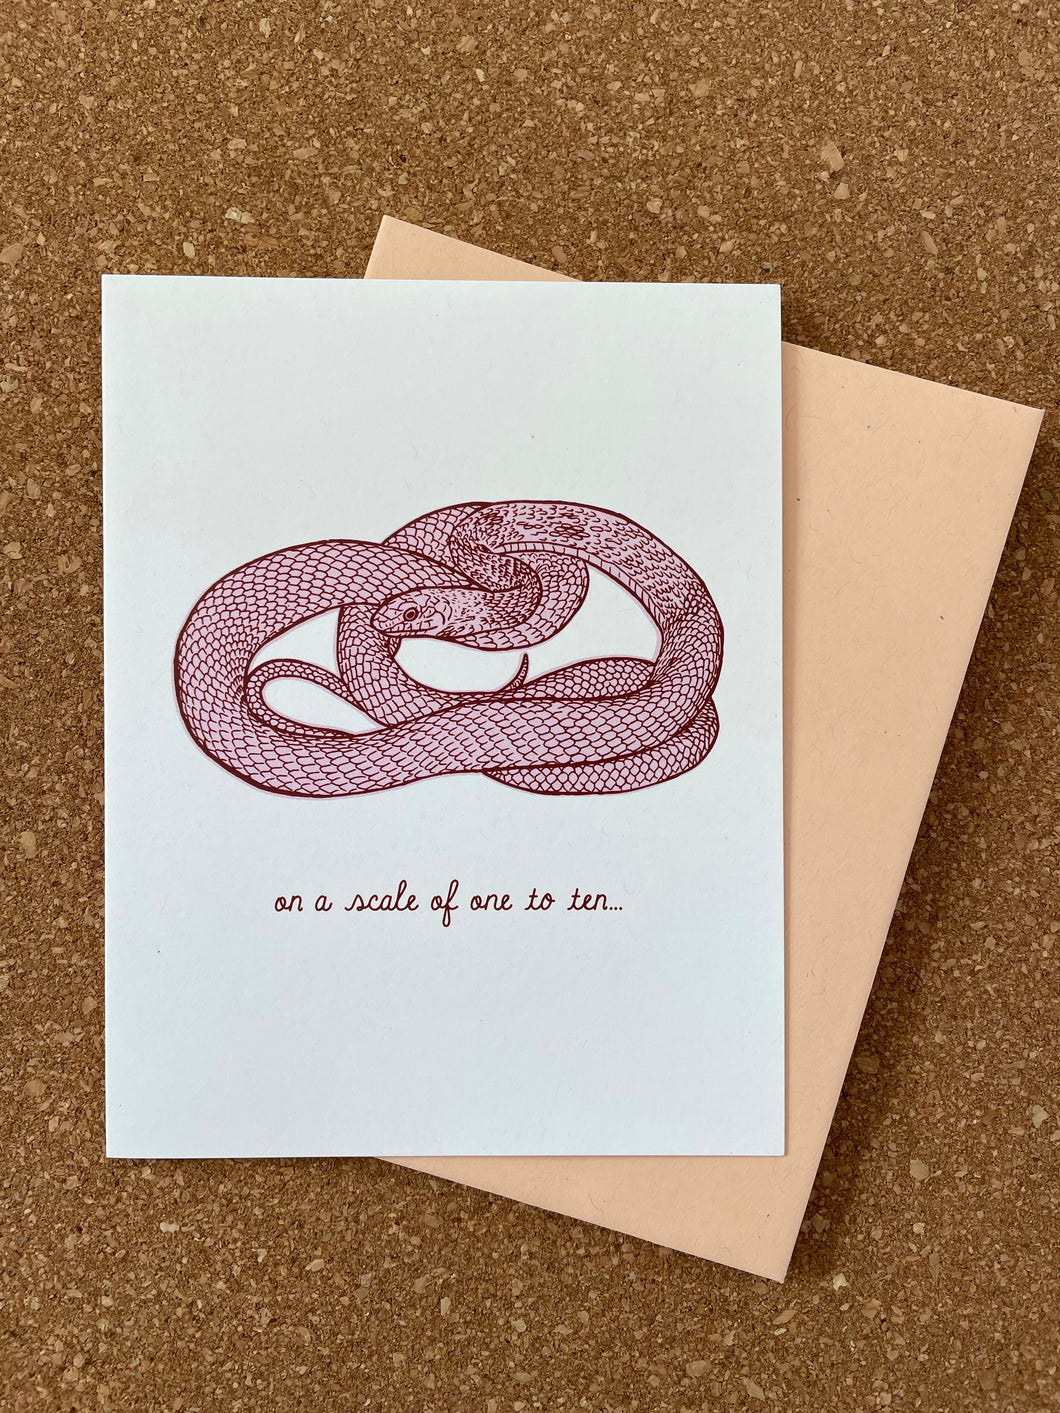 Red Racer Snake Greeting Card - on a scale of one to ten...